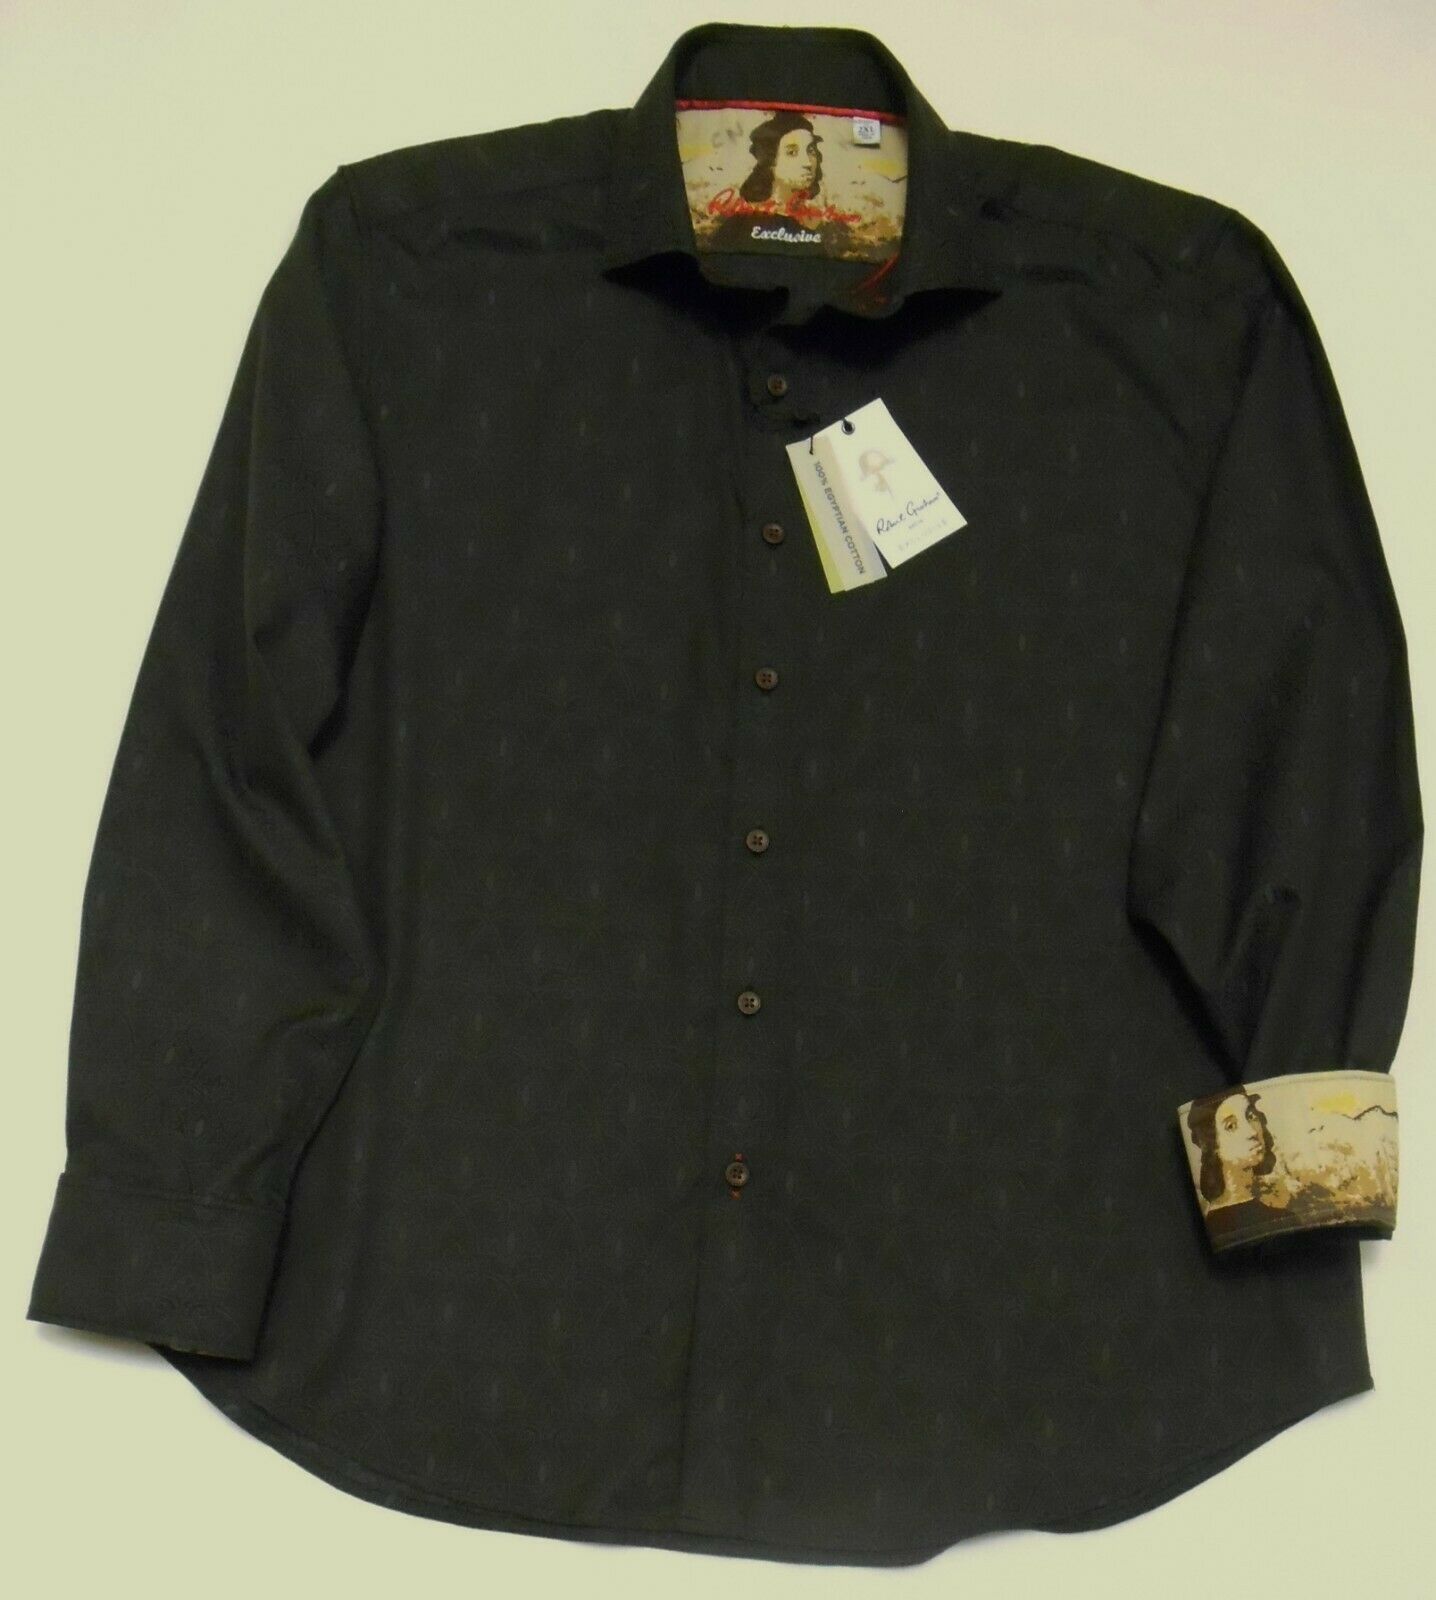 Primary image for ROBERT GRAHAM EXCLUSIVE Men's SHIRT Long Sleeve Black Damask Flip Cuffs NWT 2XL